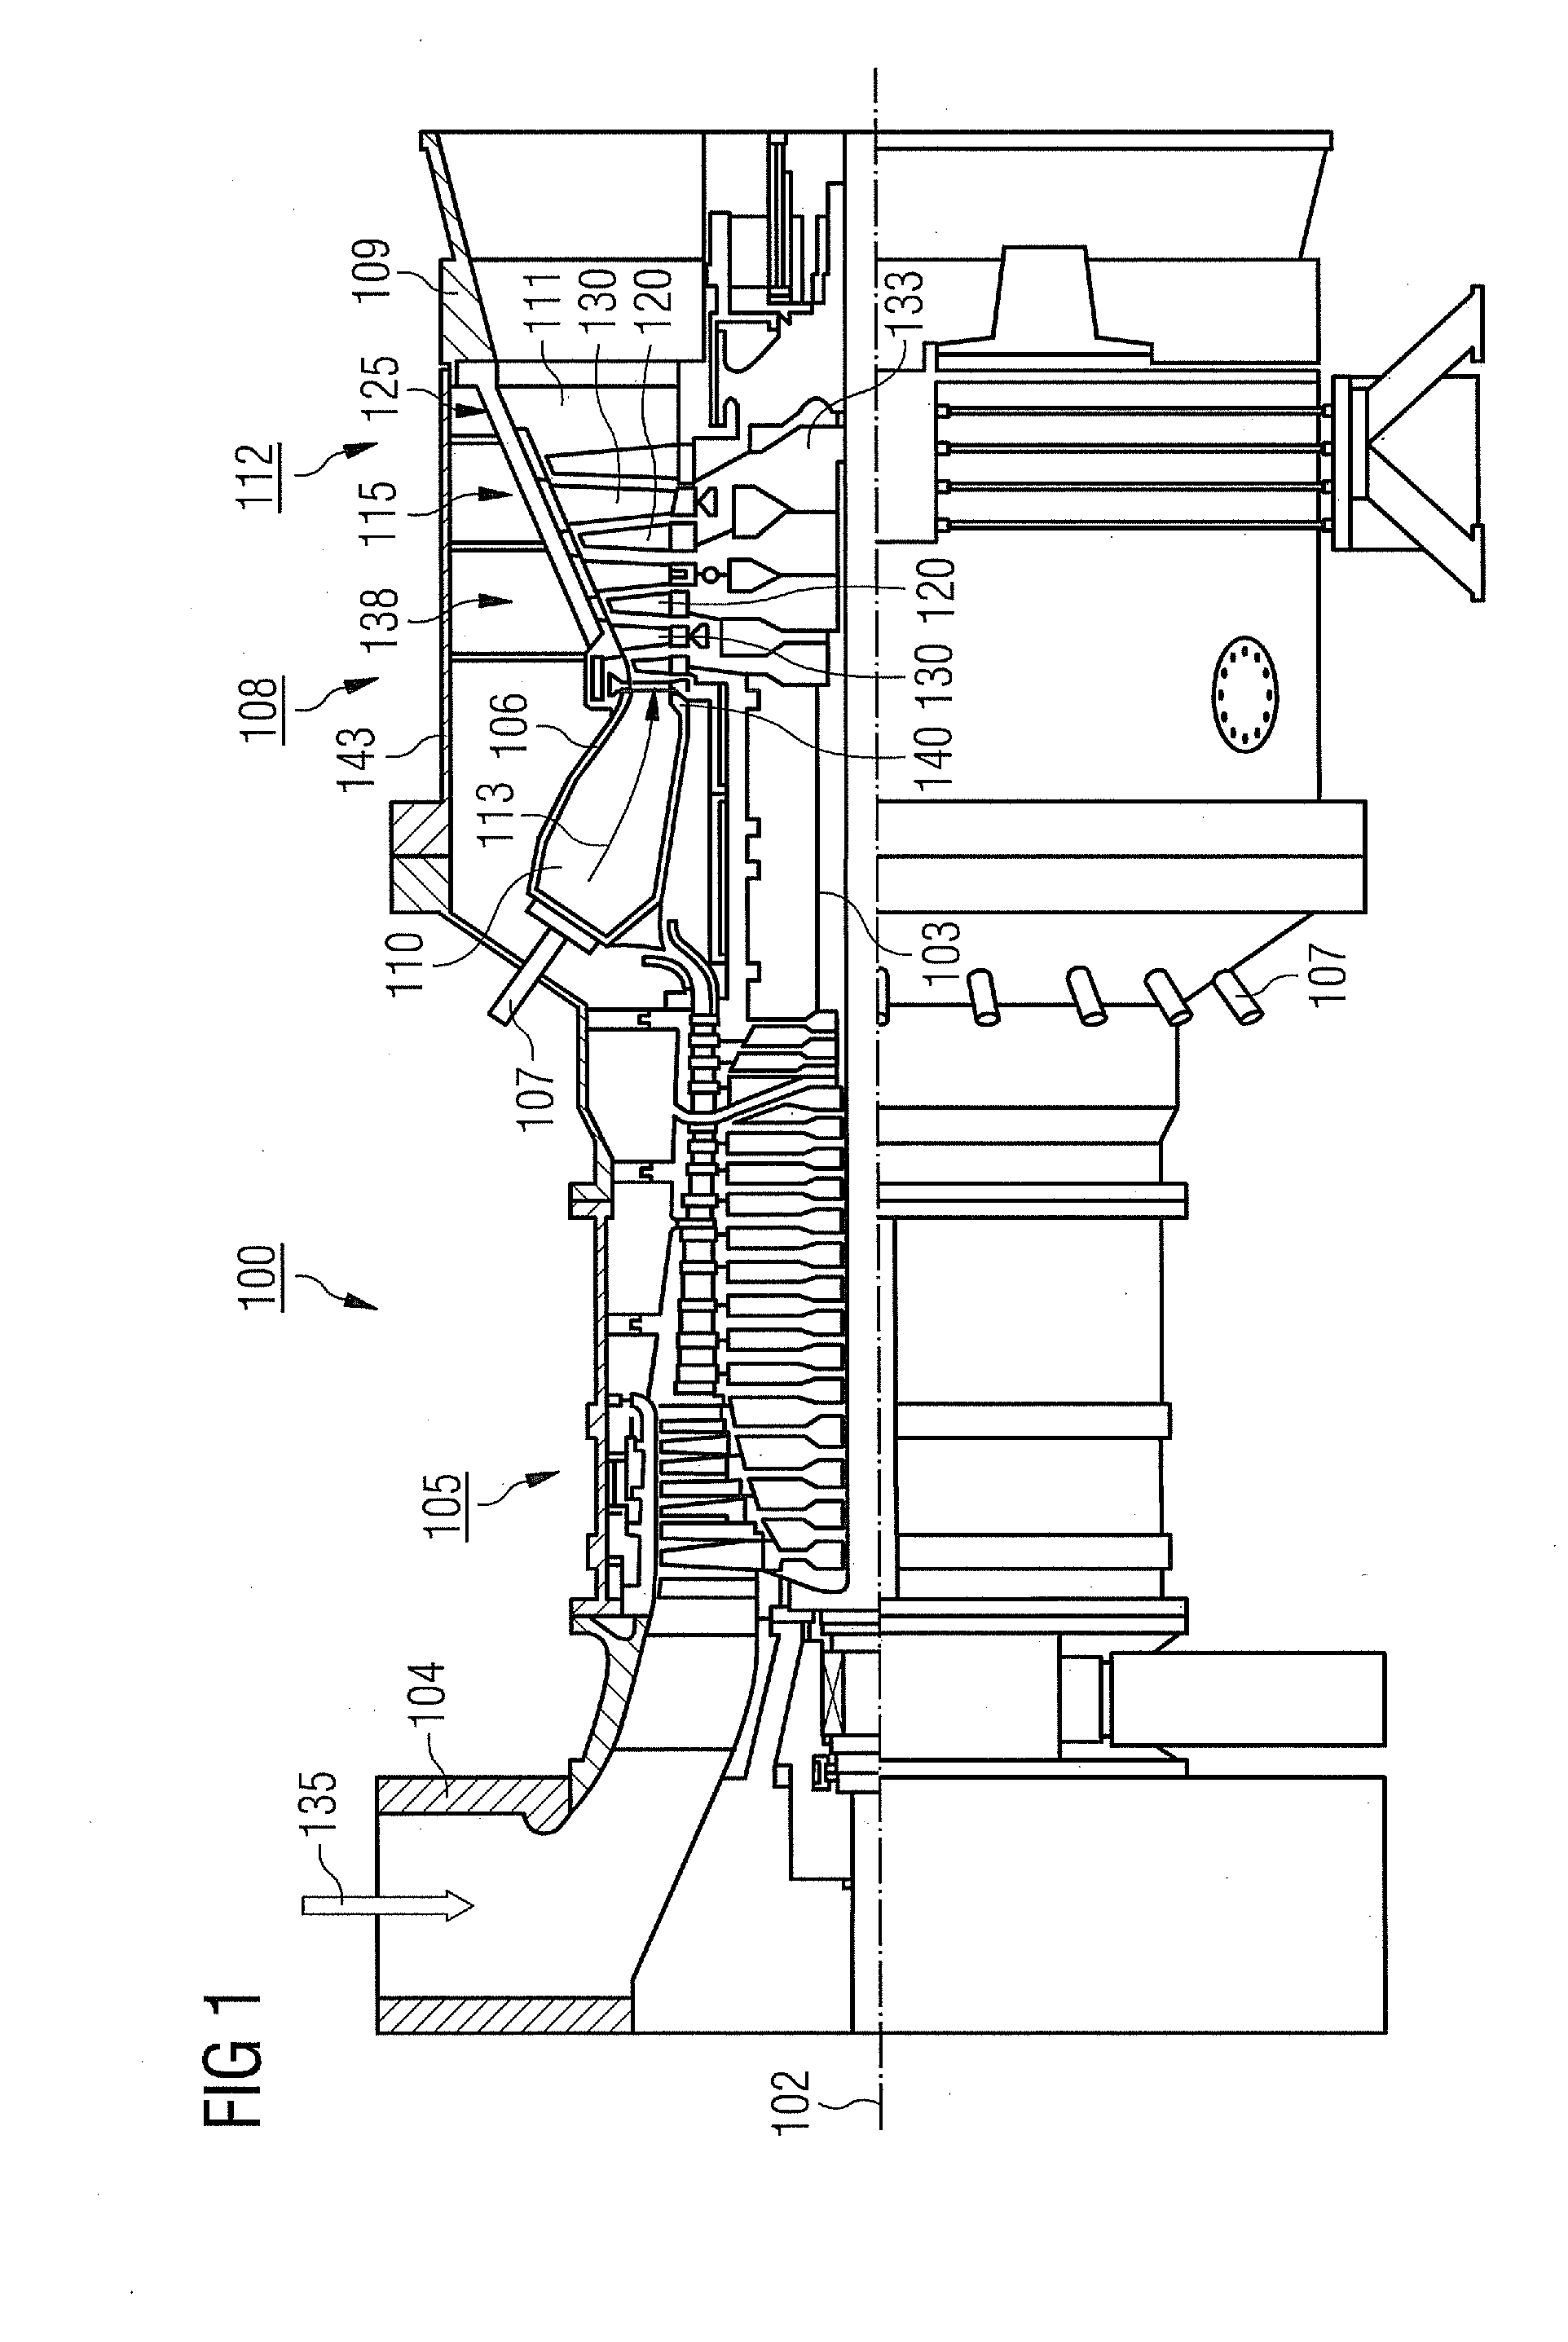 Fuel Nozzle Having a Swirl Duct and Method for Producing a Fuel Nozzle